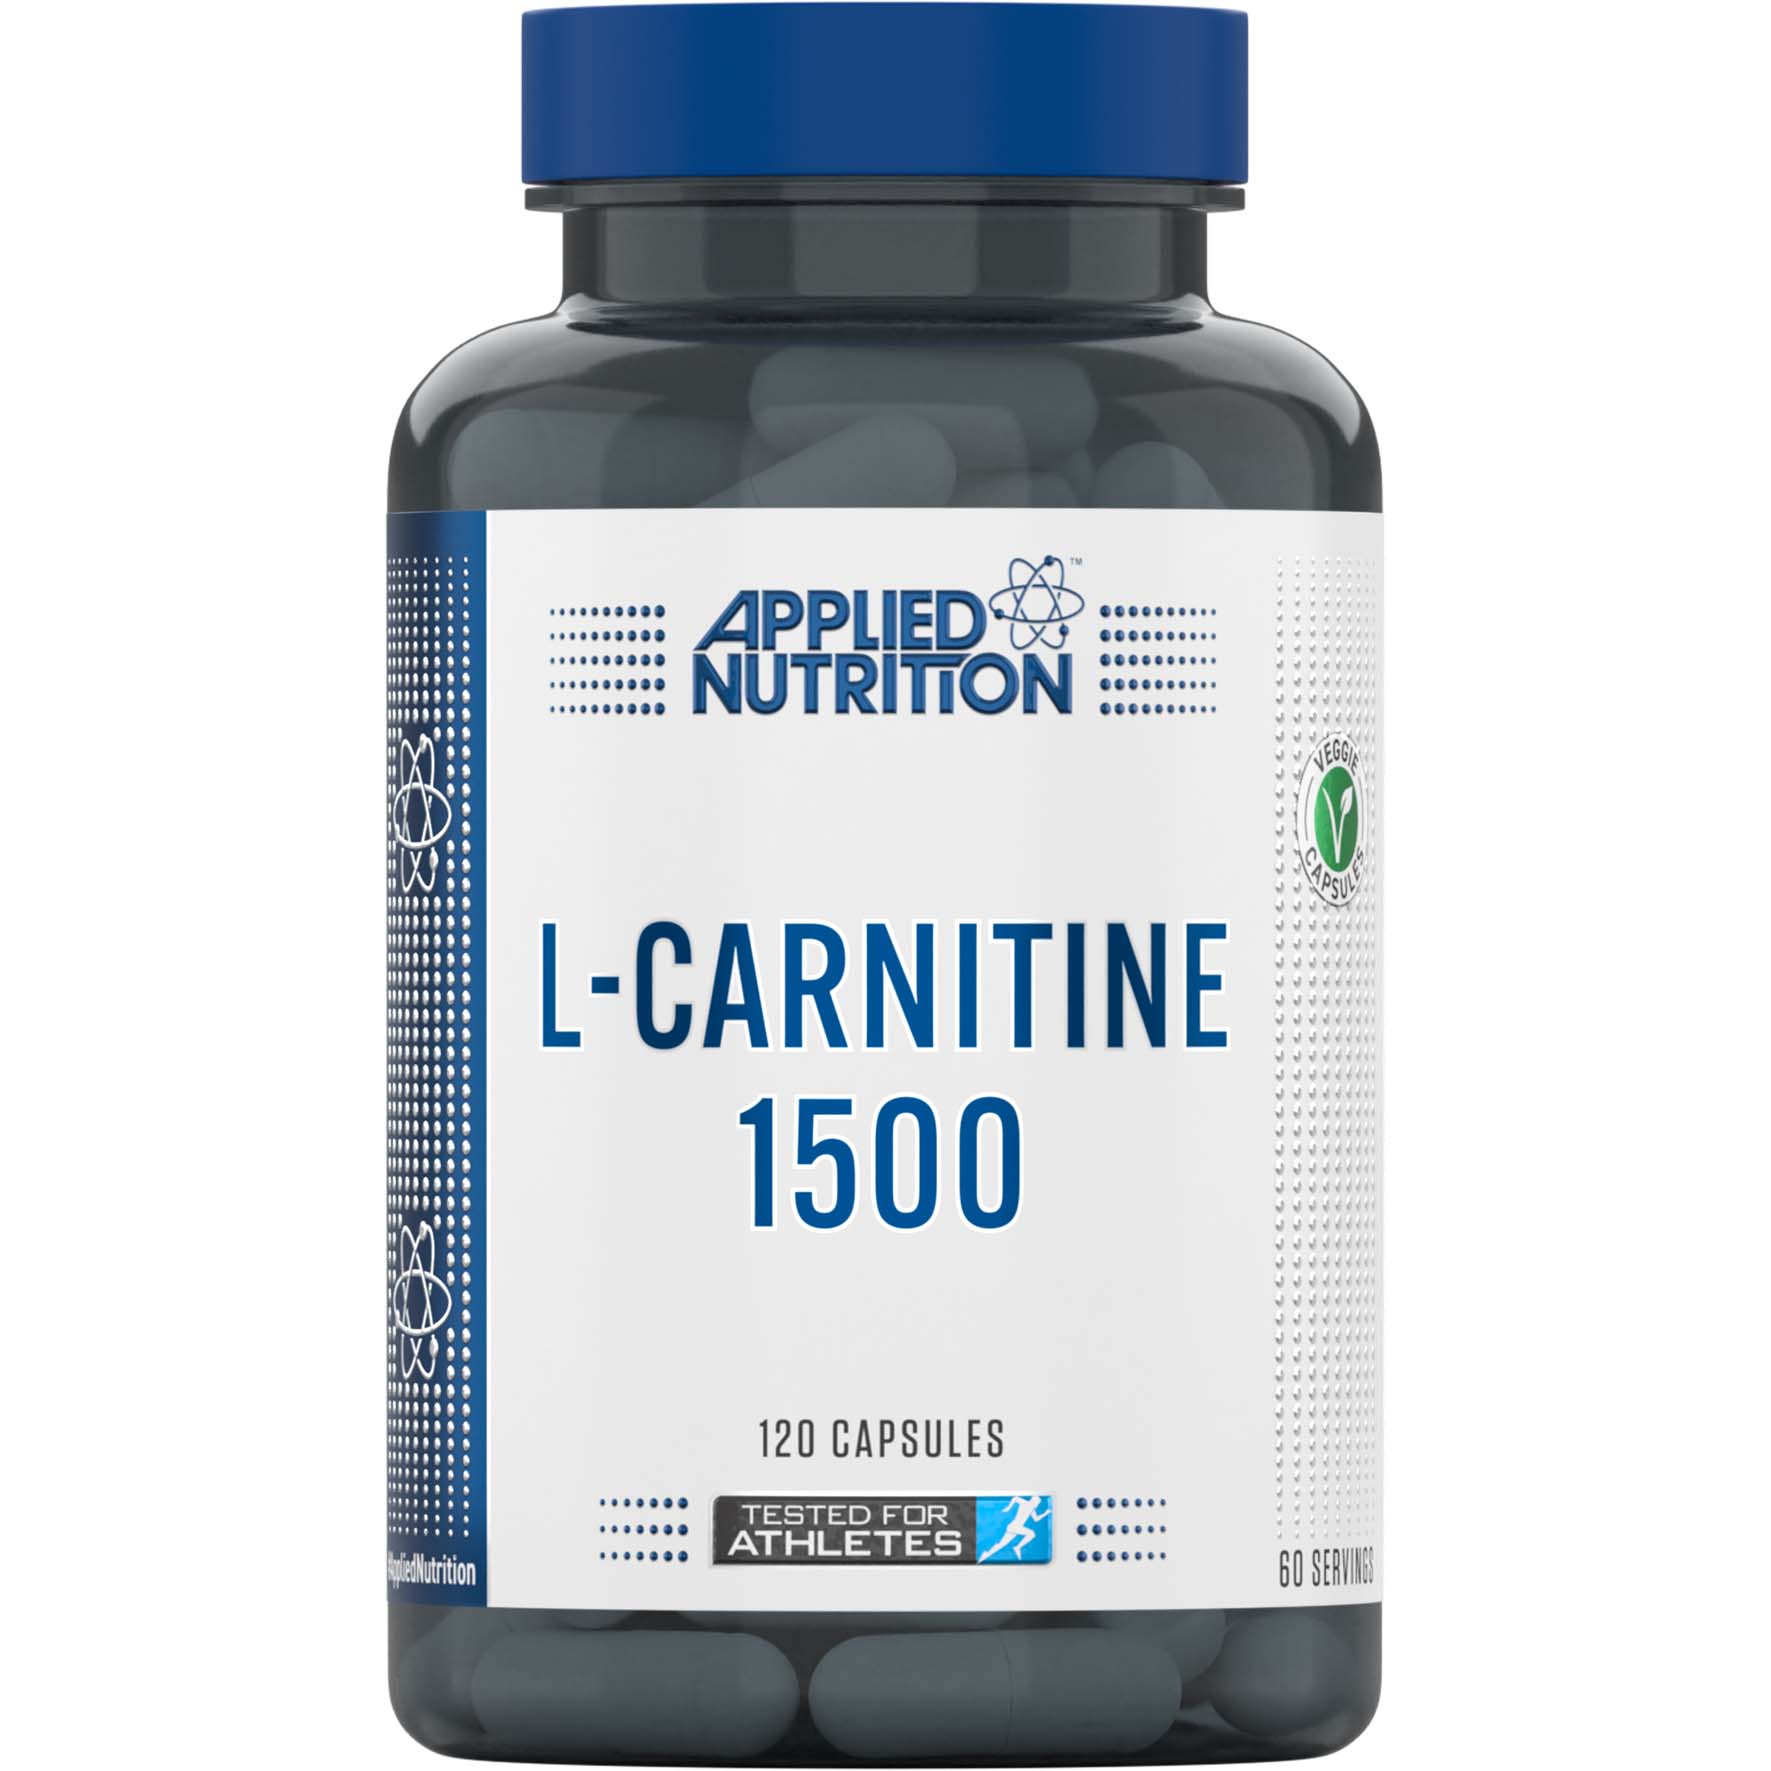 Applied Nutrition L-Carnitine 120 Capsules